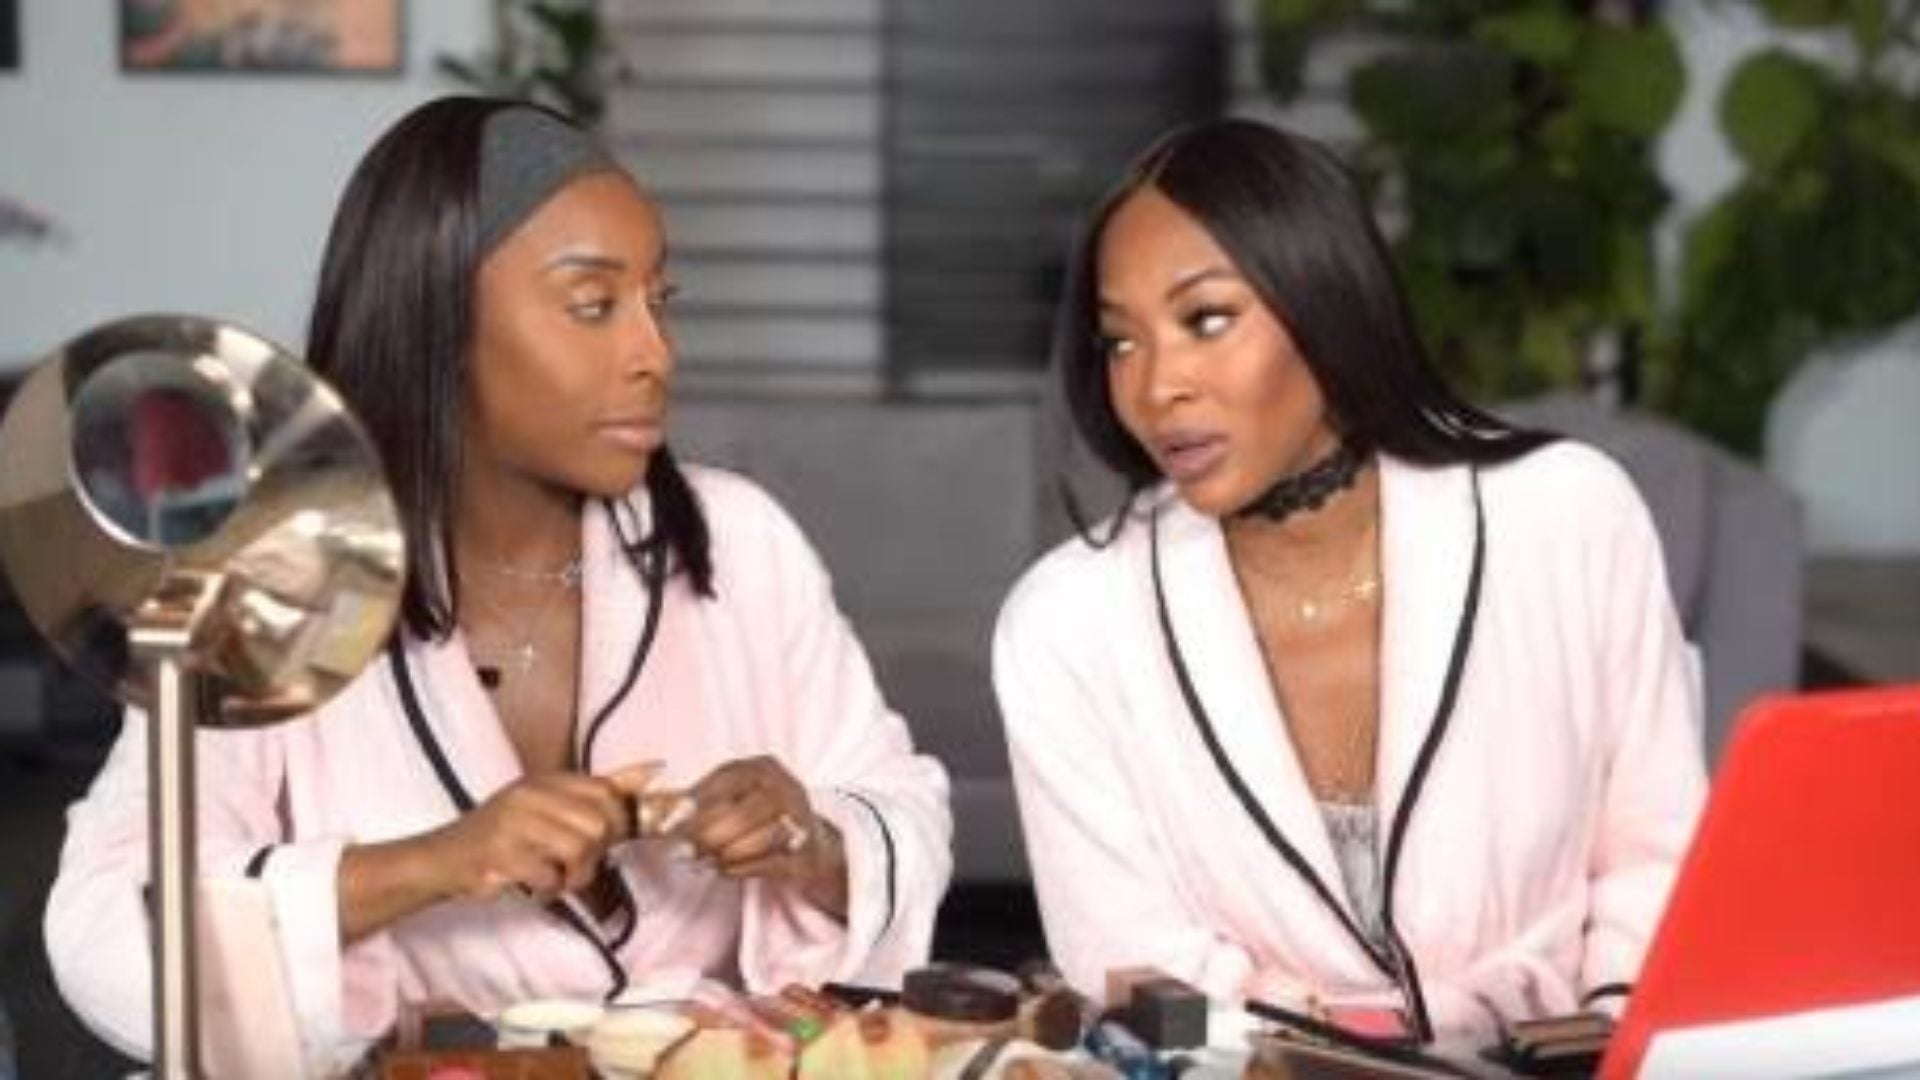 6 Things We Learned About Naomi Campbell From Her Viral Video With Makeup Guru Jackie Aina